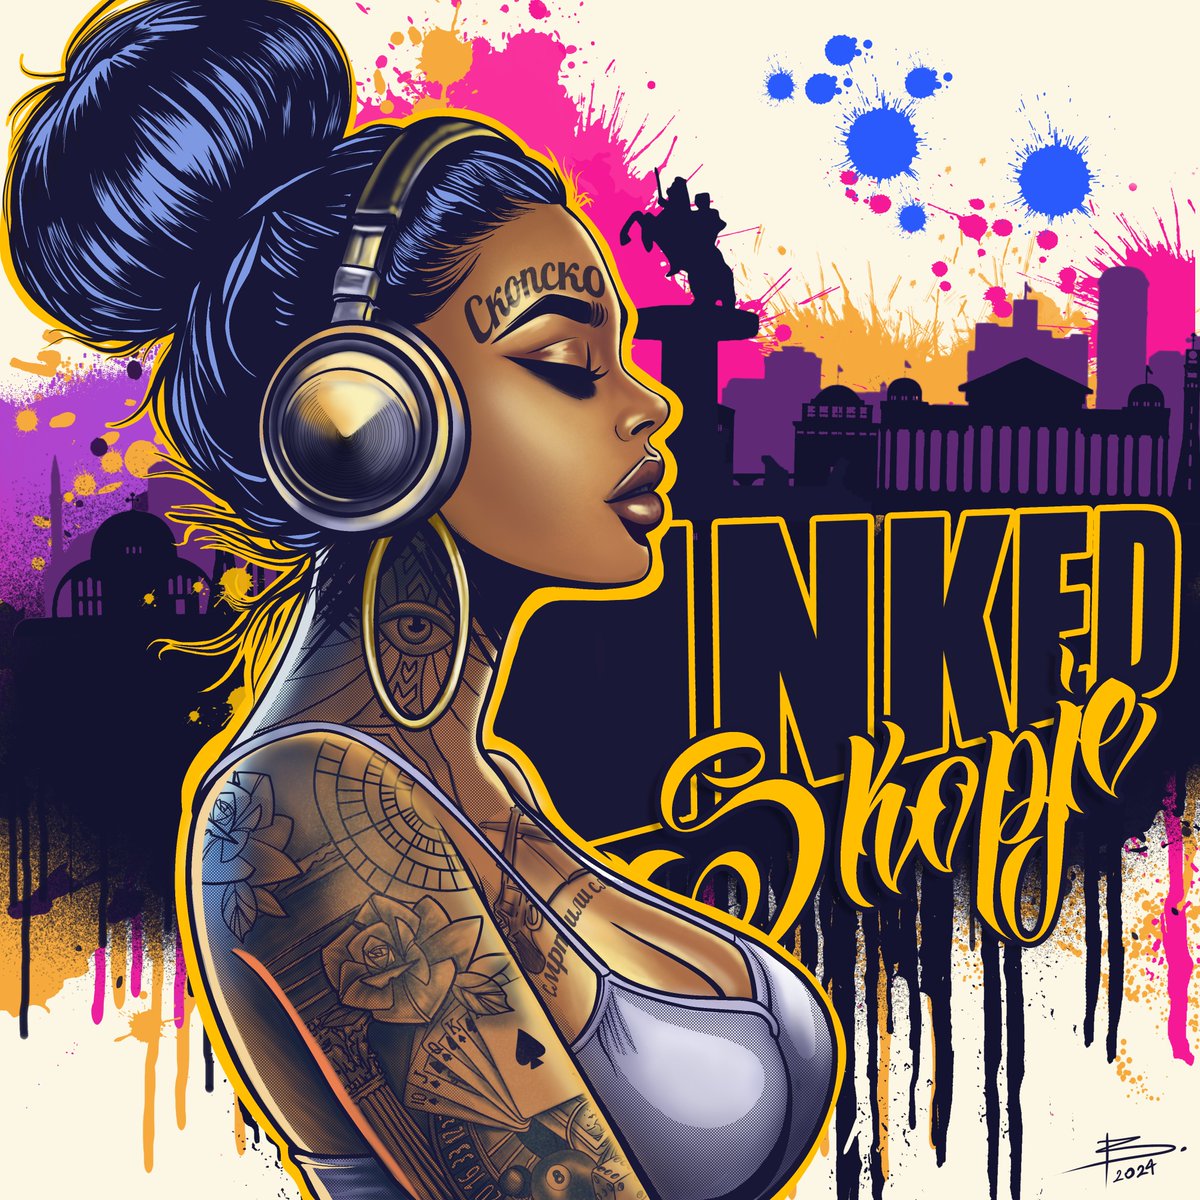 Happy to announce that INKED SKOPJE is SOLD OUT 🥳🥳🥳 While I was sleeping my awesome friend @_bennycreator sniped all 8 editions that were left, thank you so much fam 🙏🫂🫶 Can't wait to start the mural 🥰🥰🥰